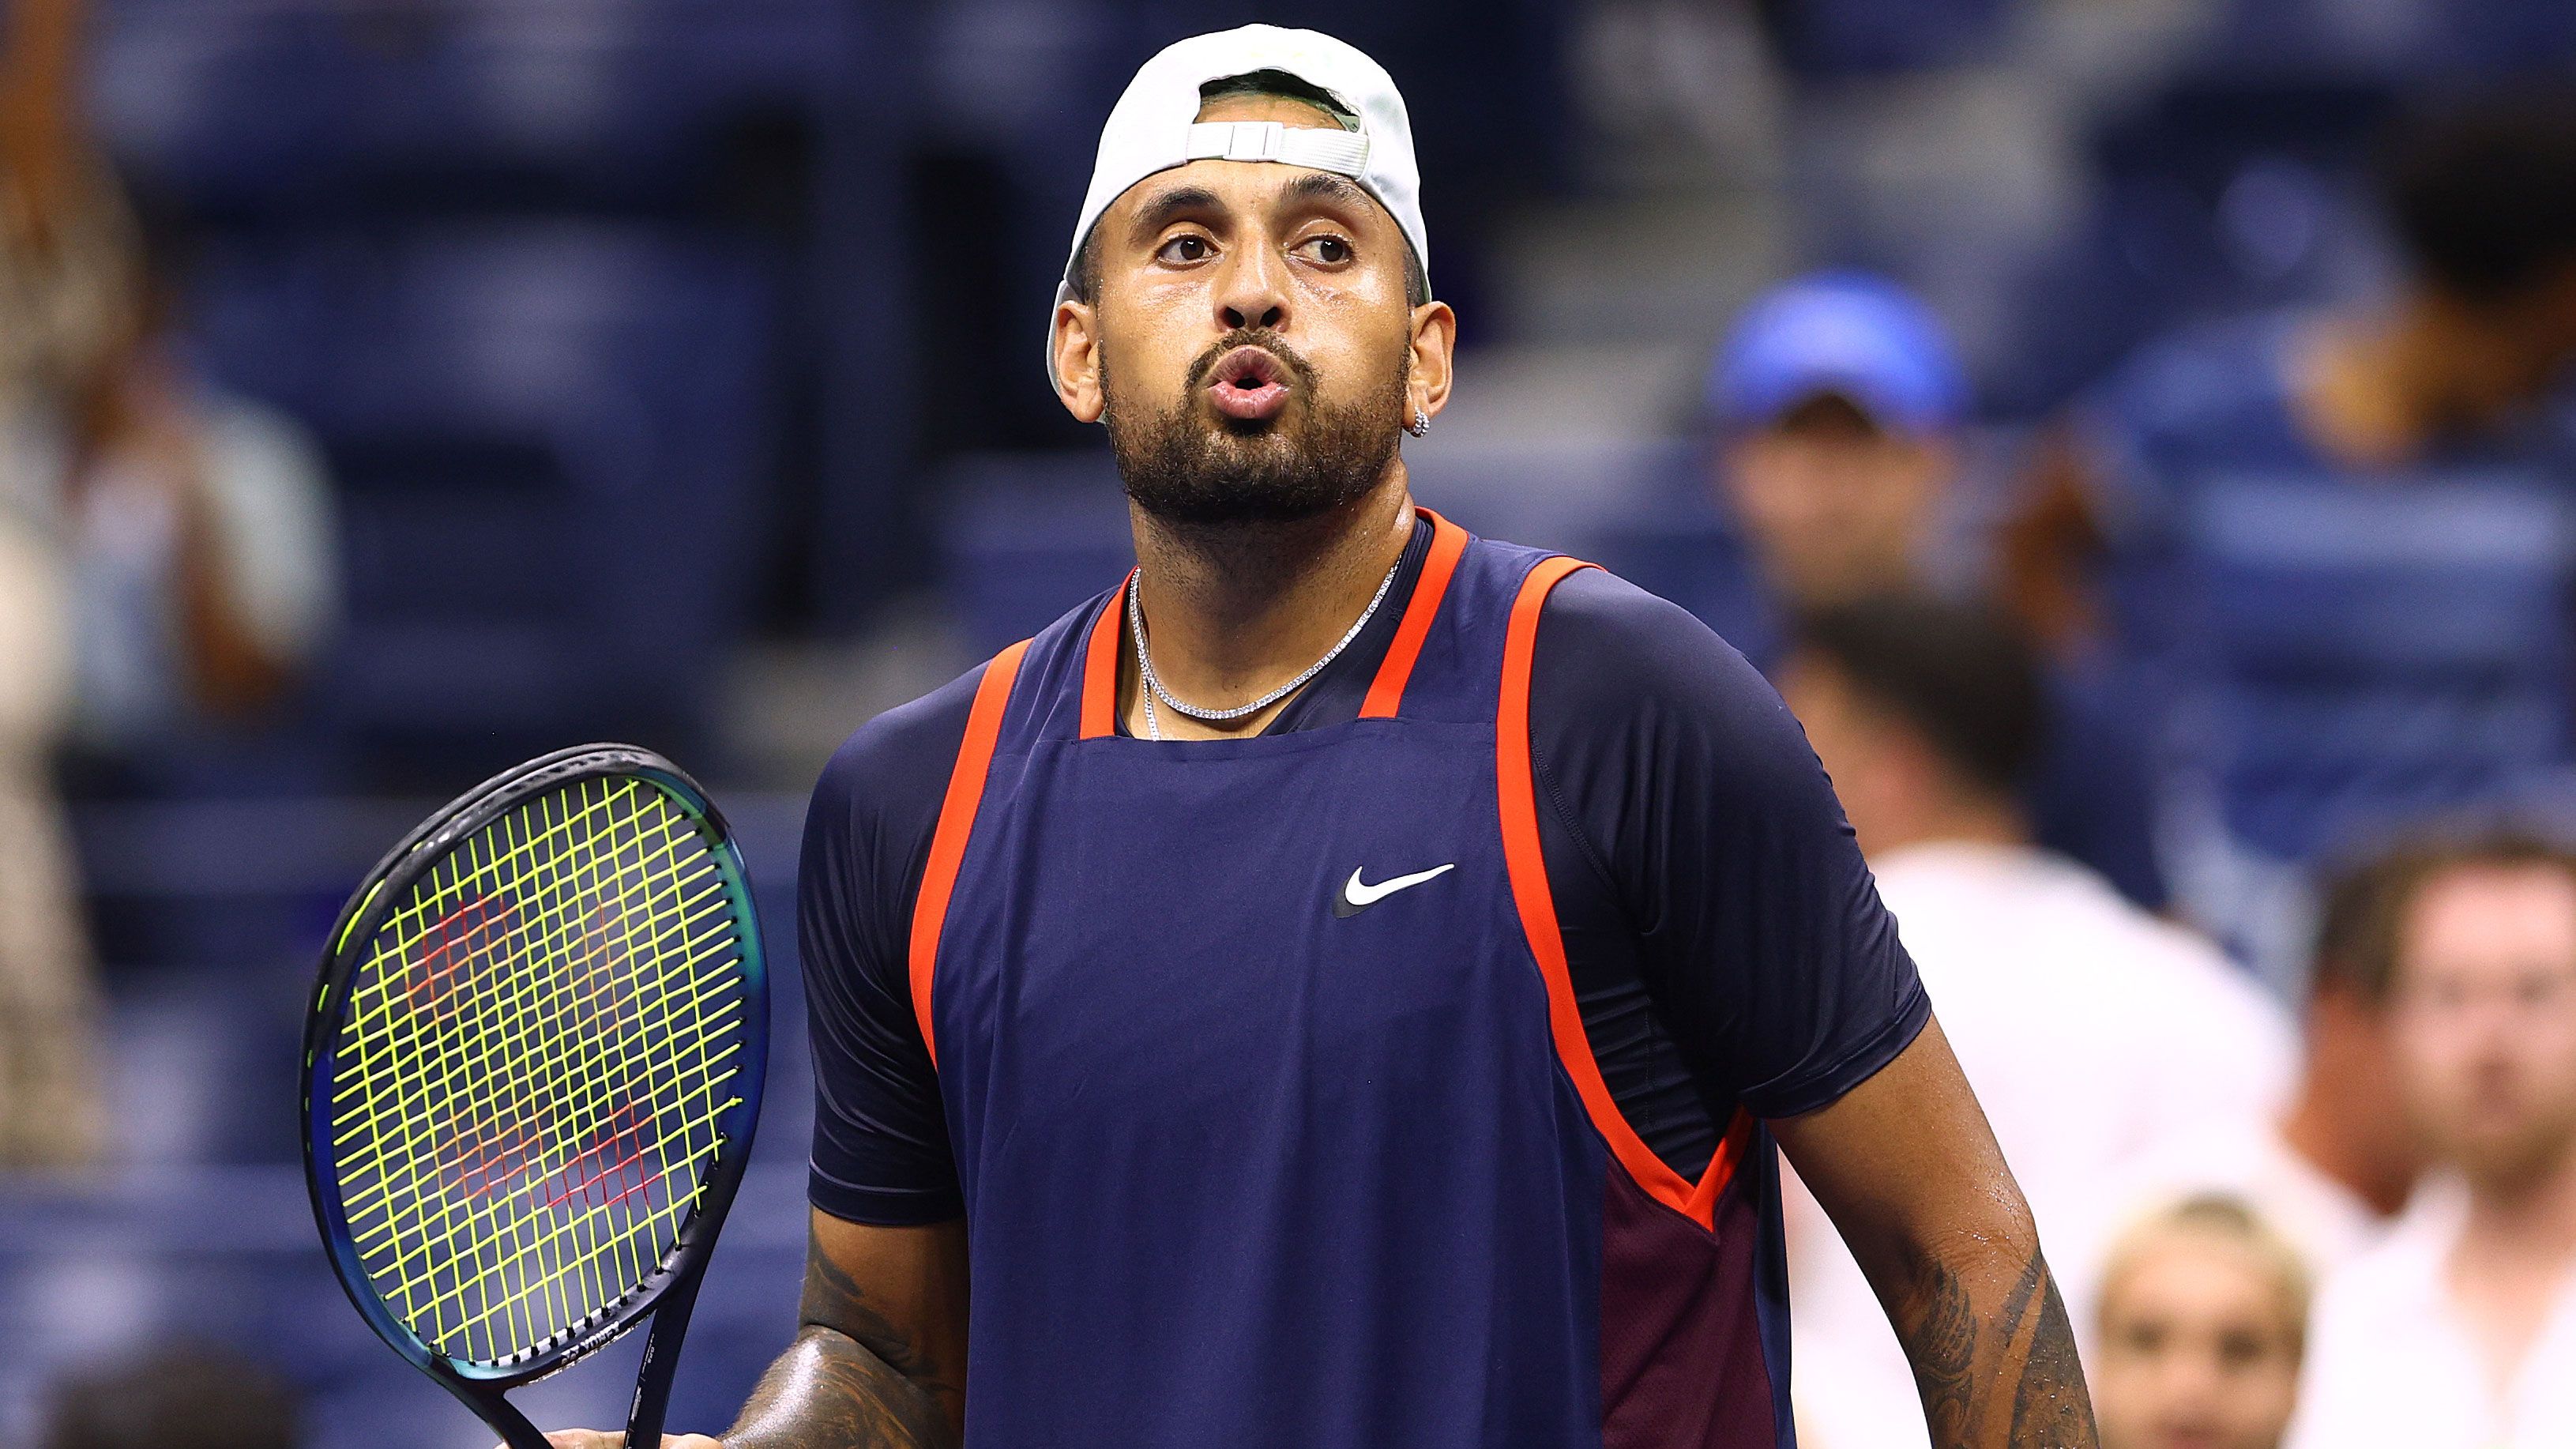 Nick Kyrgios reacts after defeating best mate Thanasi Kokkinakis in the first round of the 2022 US Open.